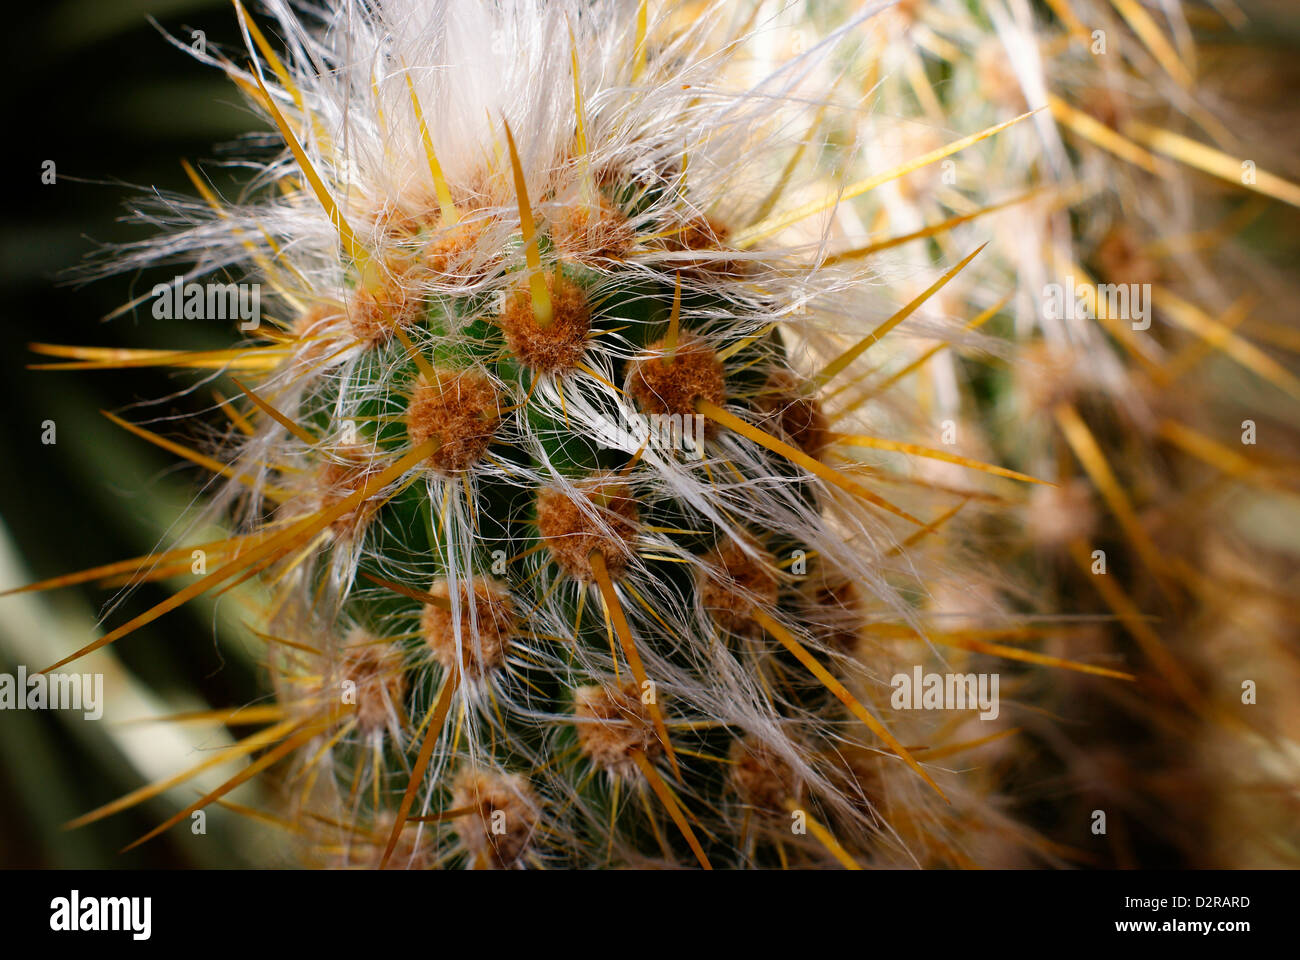 Oreocereus celcianus / Grandfather cactus Showing strong new spines and fresh white hair at the crown. (Mountain Cacti - Andes). Stock Photo